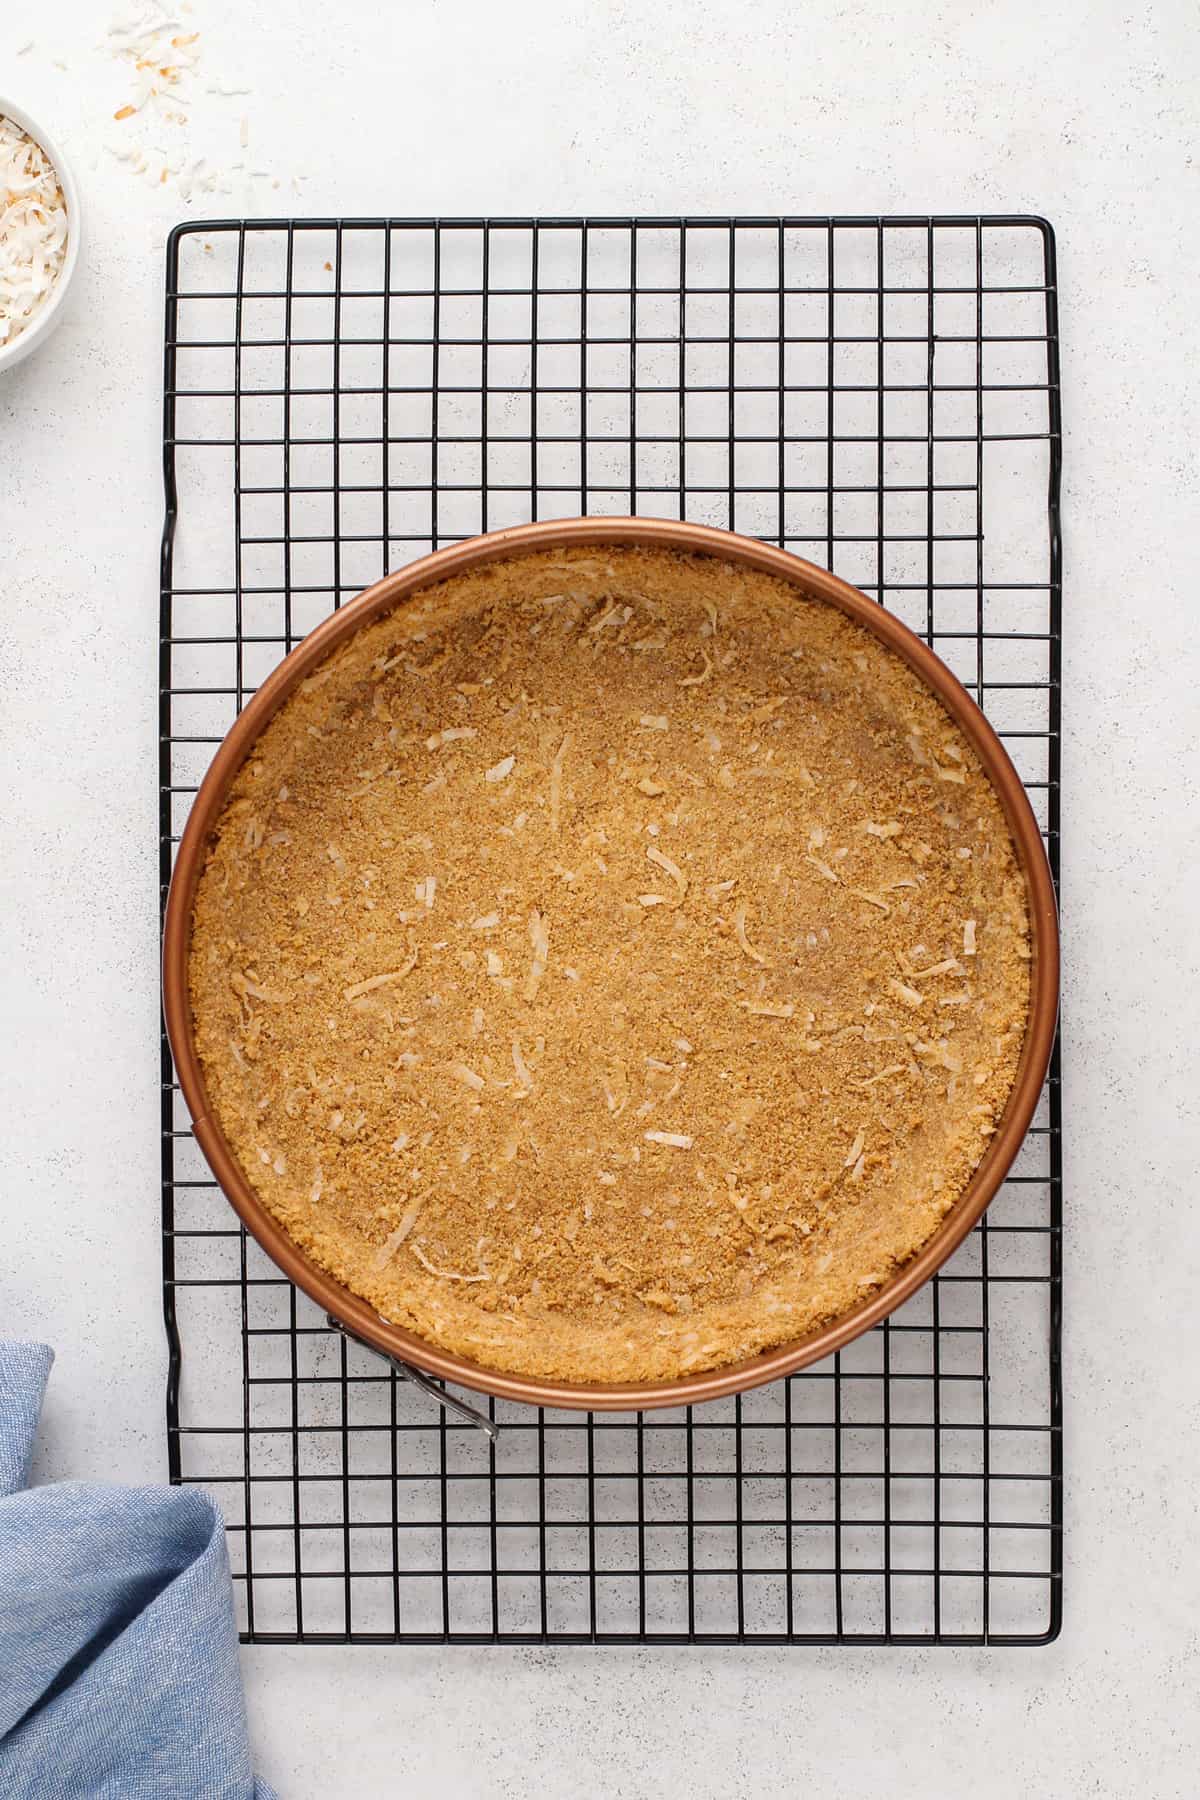 Baked coconut graham cracker crust in a springform pan set on a wire rack.